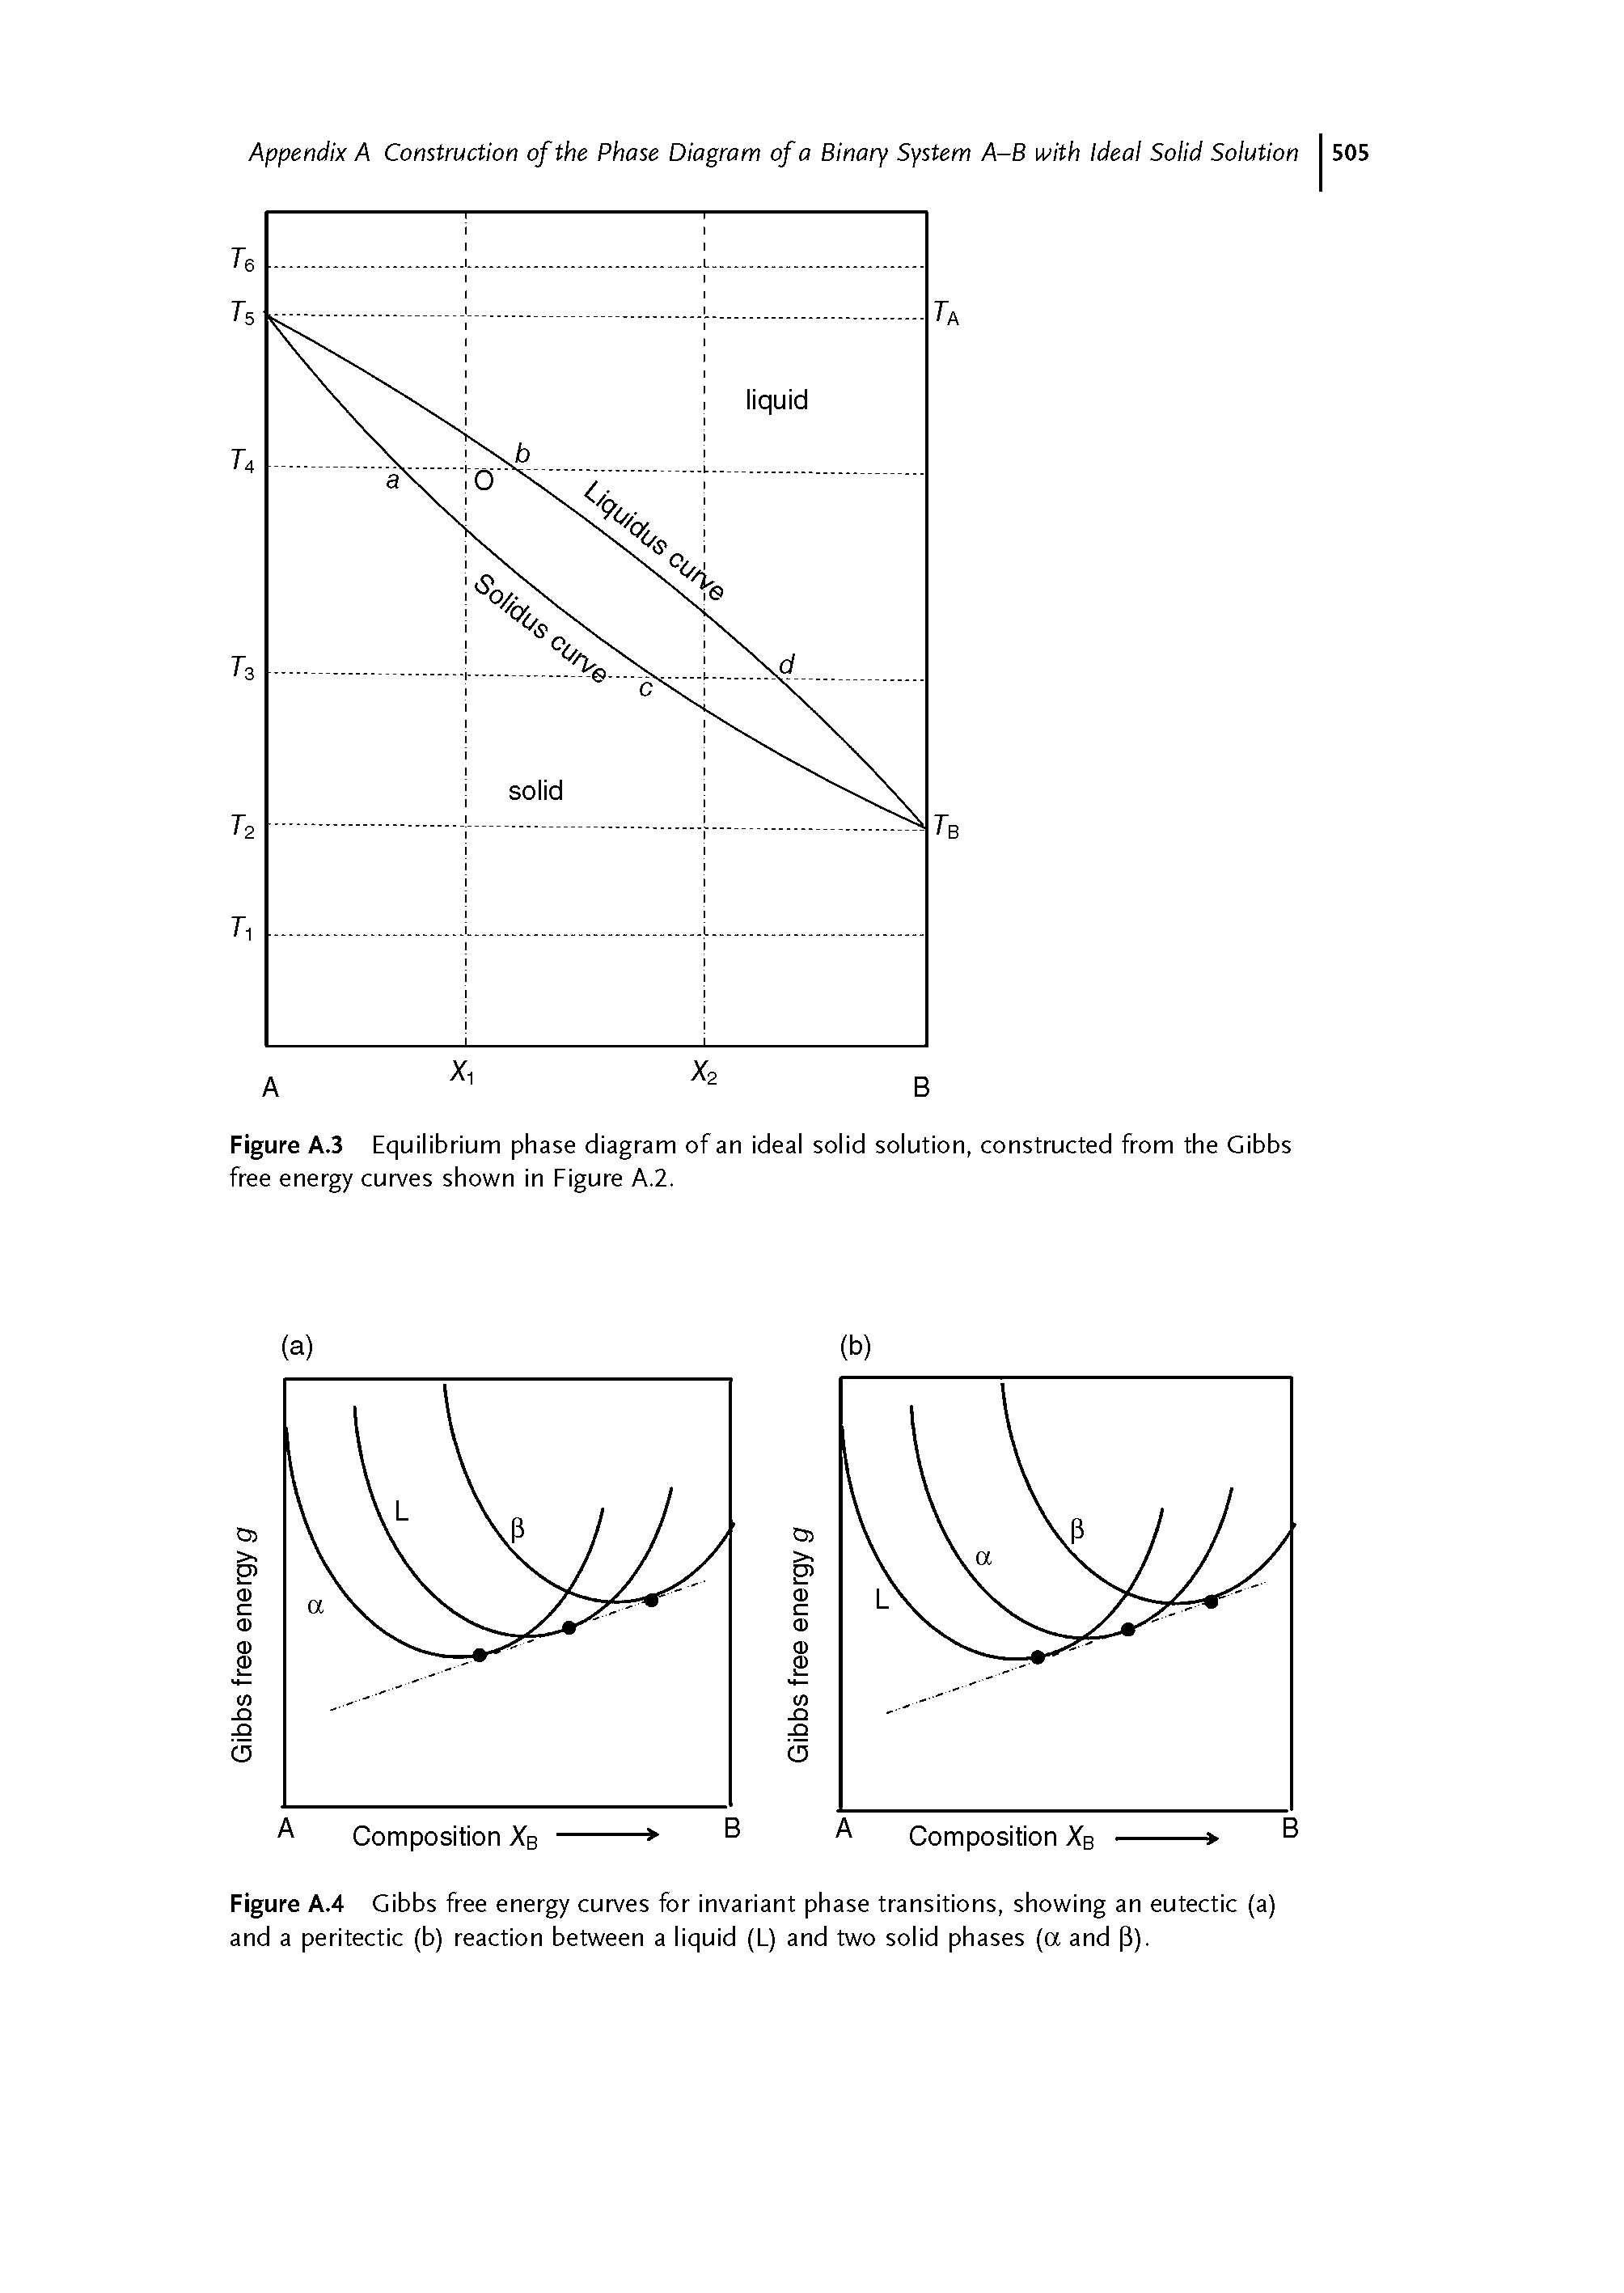 Figure A.4 Gibbs free energy curves for invariant phase transitions, showing an eutectic (a) and a peritectic (b) reaction between a liquid (L) and two solid phases (a and P).